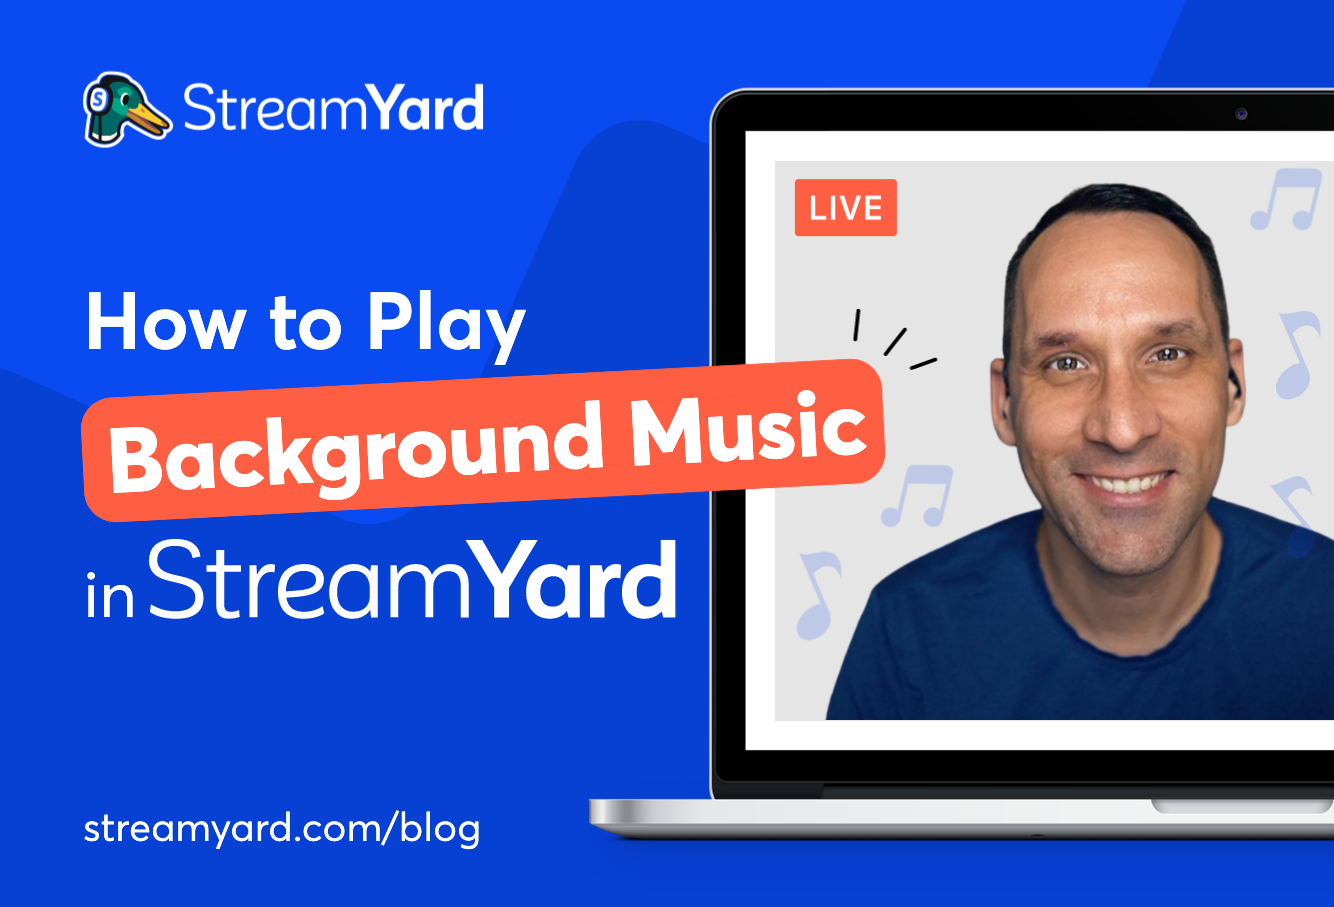 How To Play Background Music In StreamYard